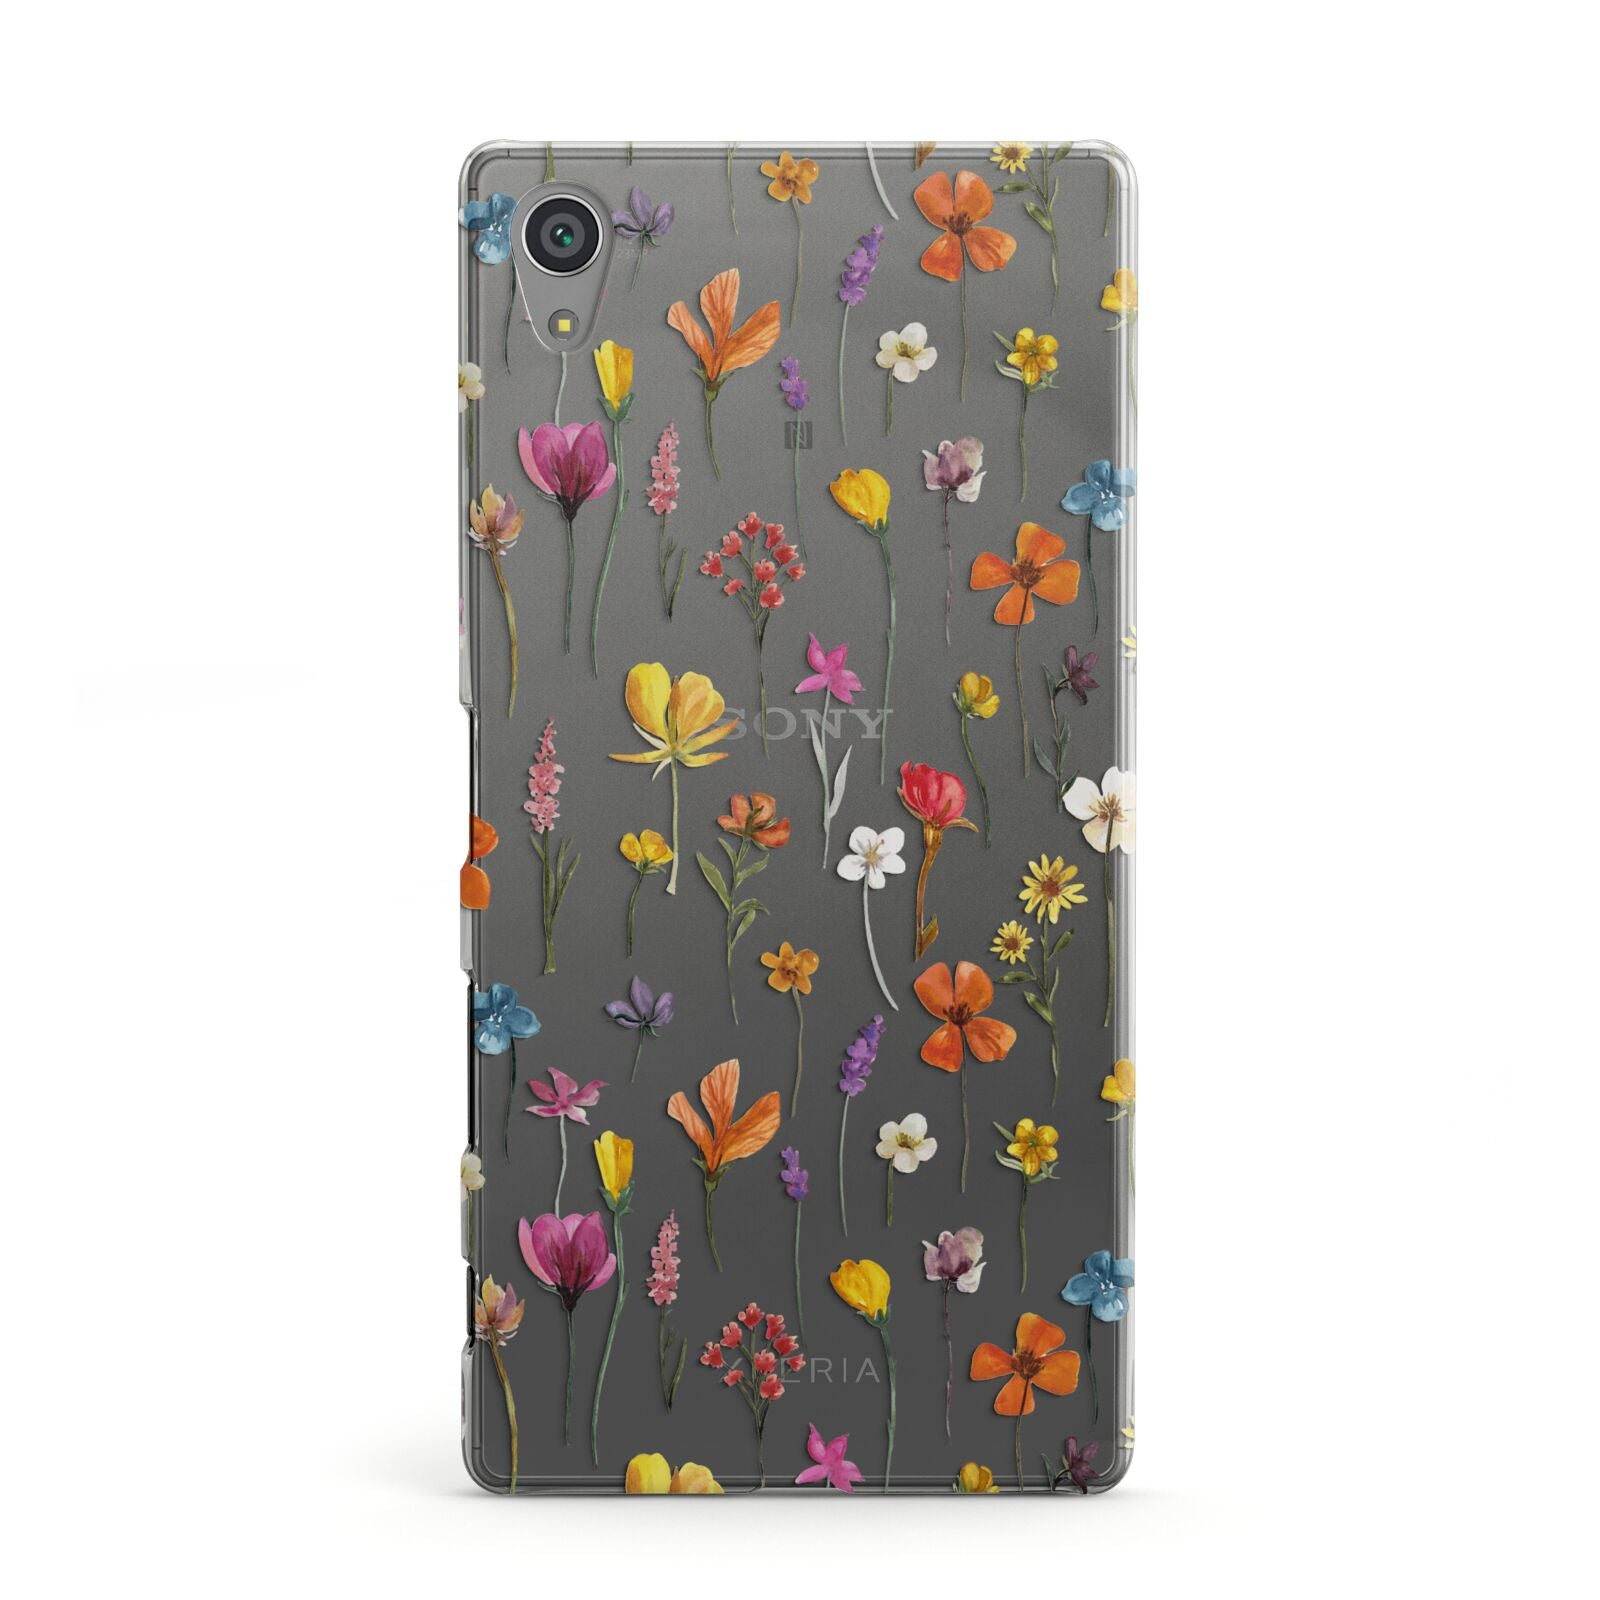 Botanical Floral Sony Xperia Case